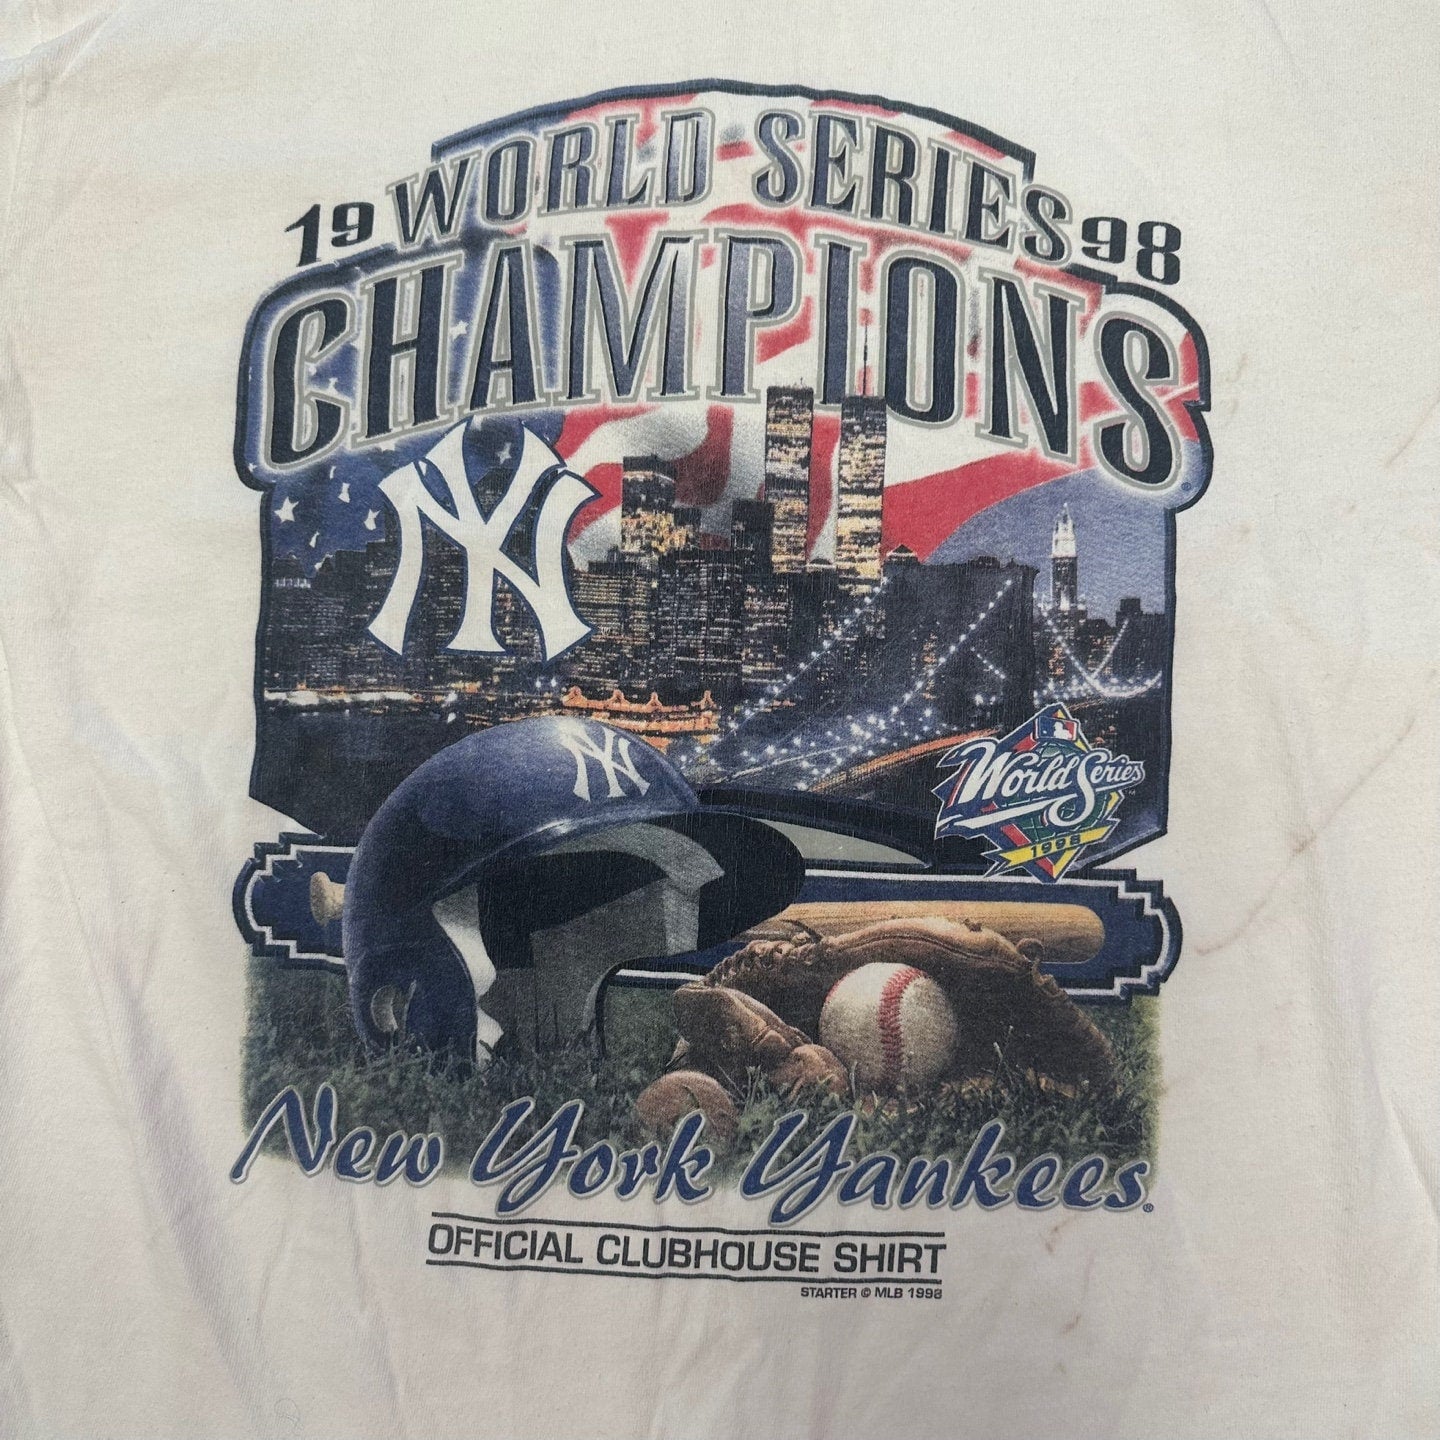 1998 Vintage World Series Champions New York Yankees Official Clubhouse Shirt T-Shirt | Vintage Graphic T-Shirt | SKU M-2156 |